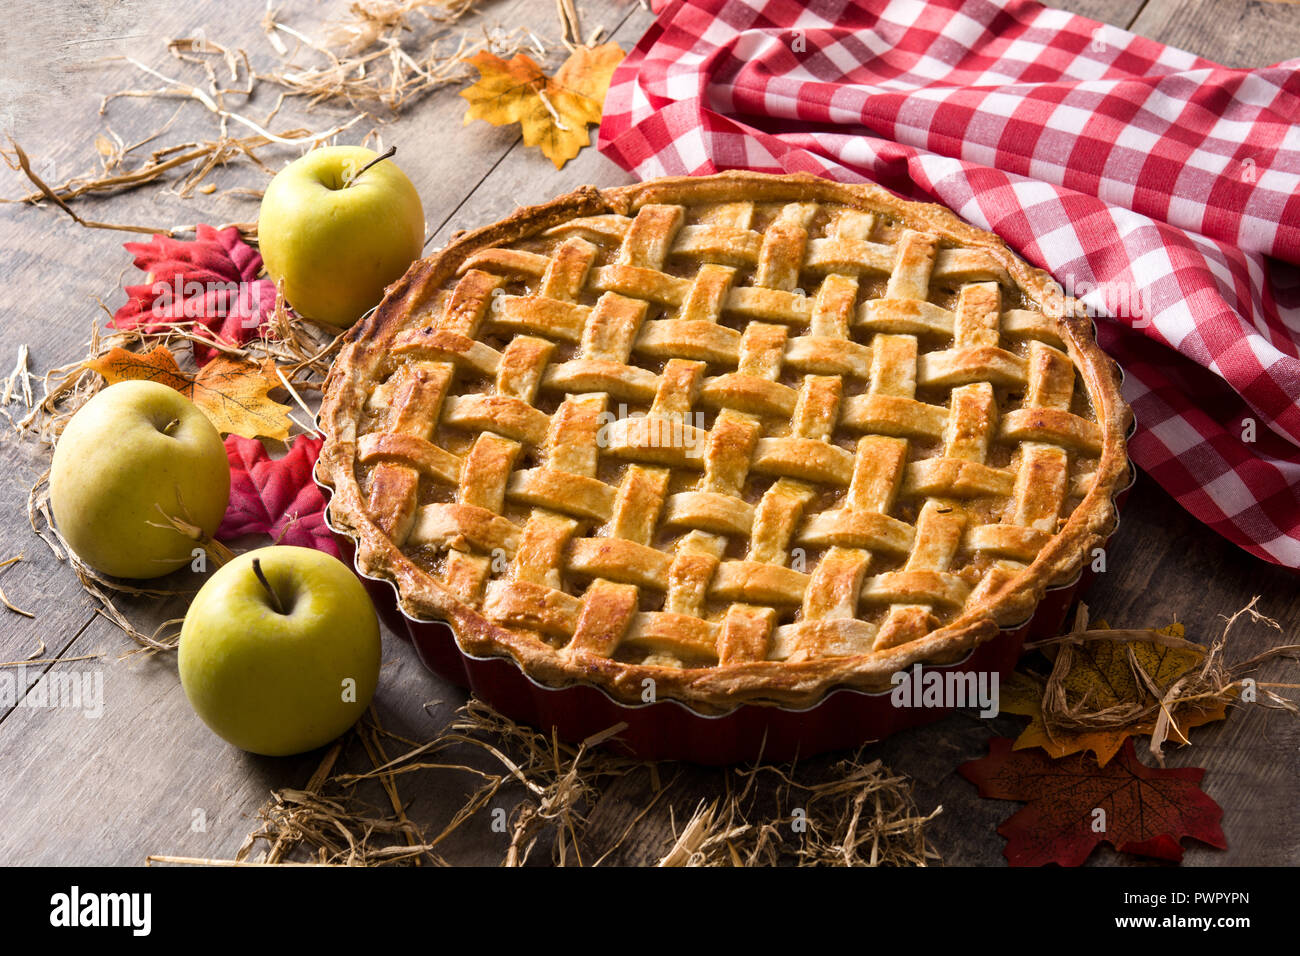 Homemade traditional apple pie on wooden table. Stock Photo